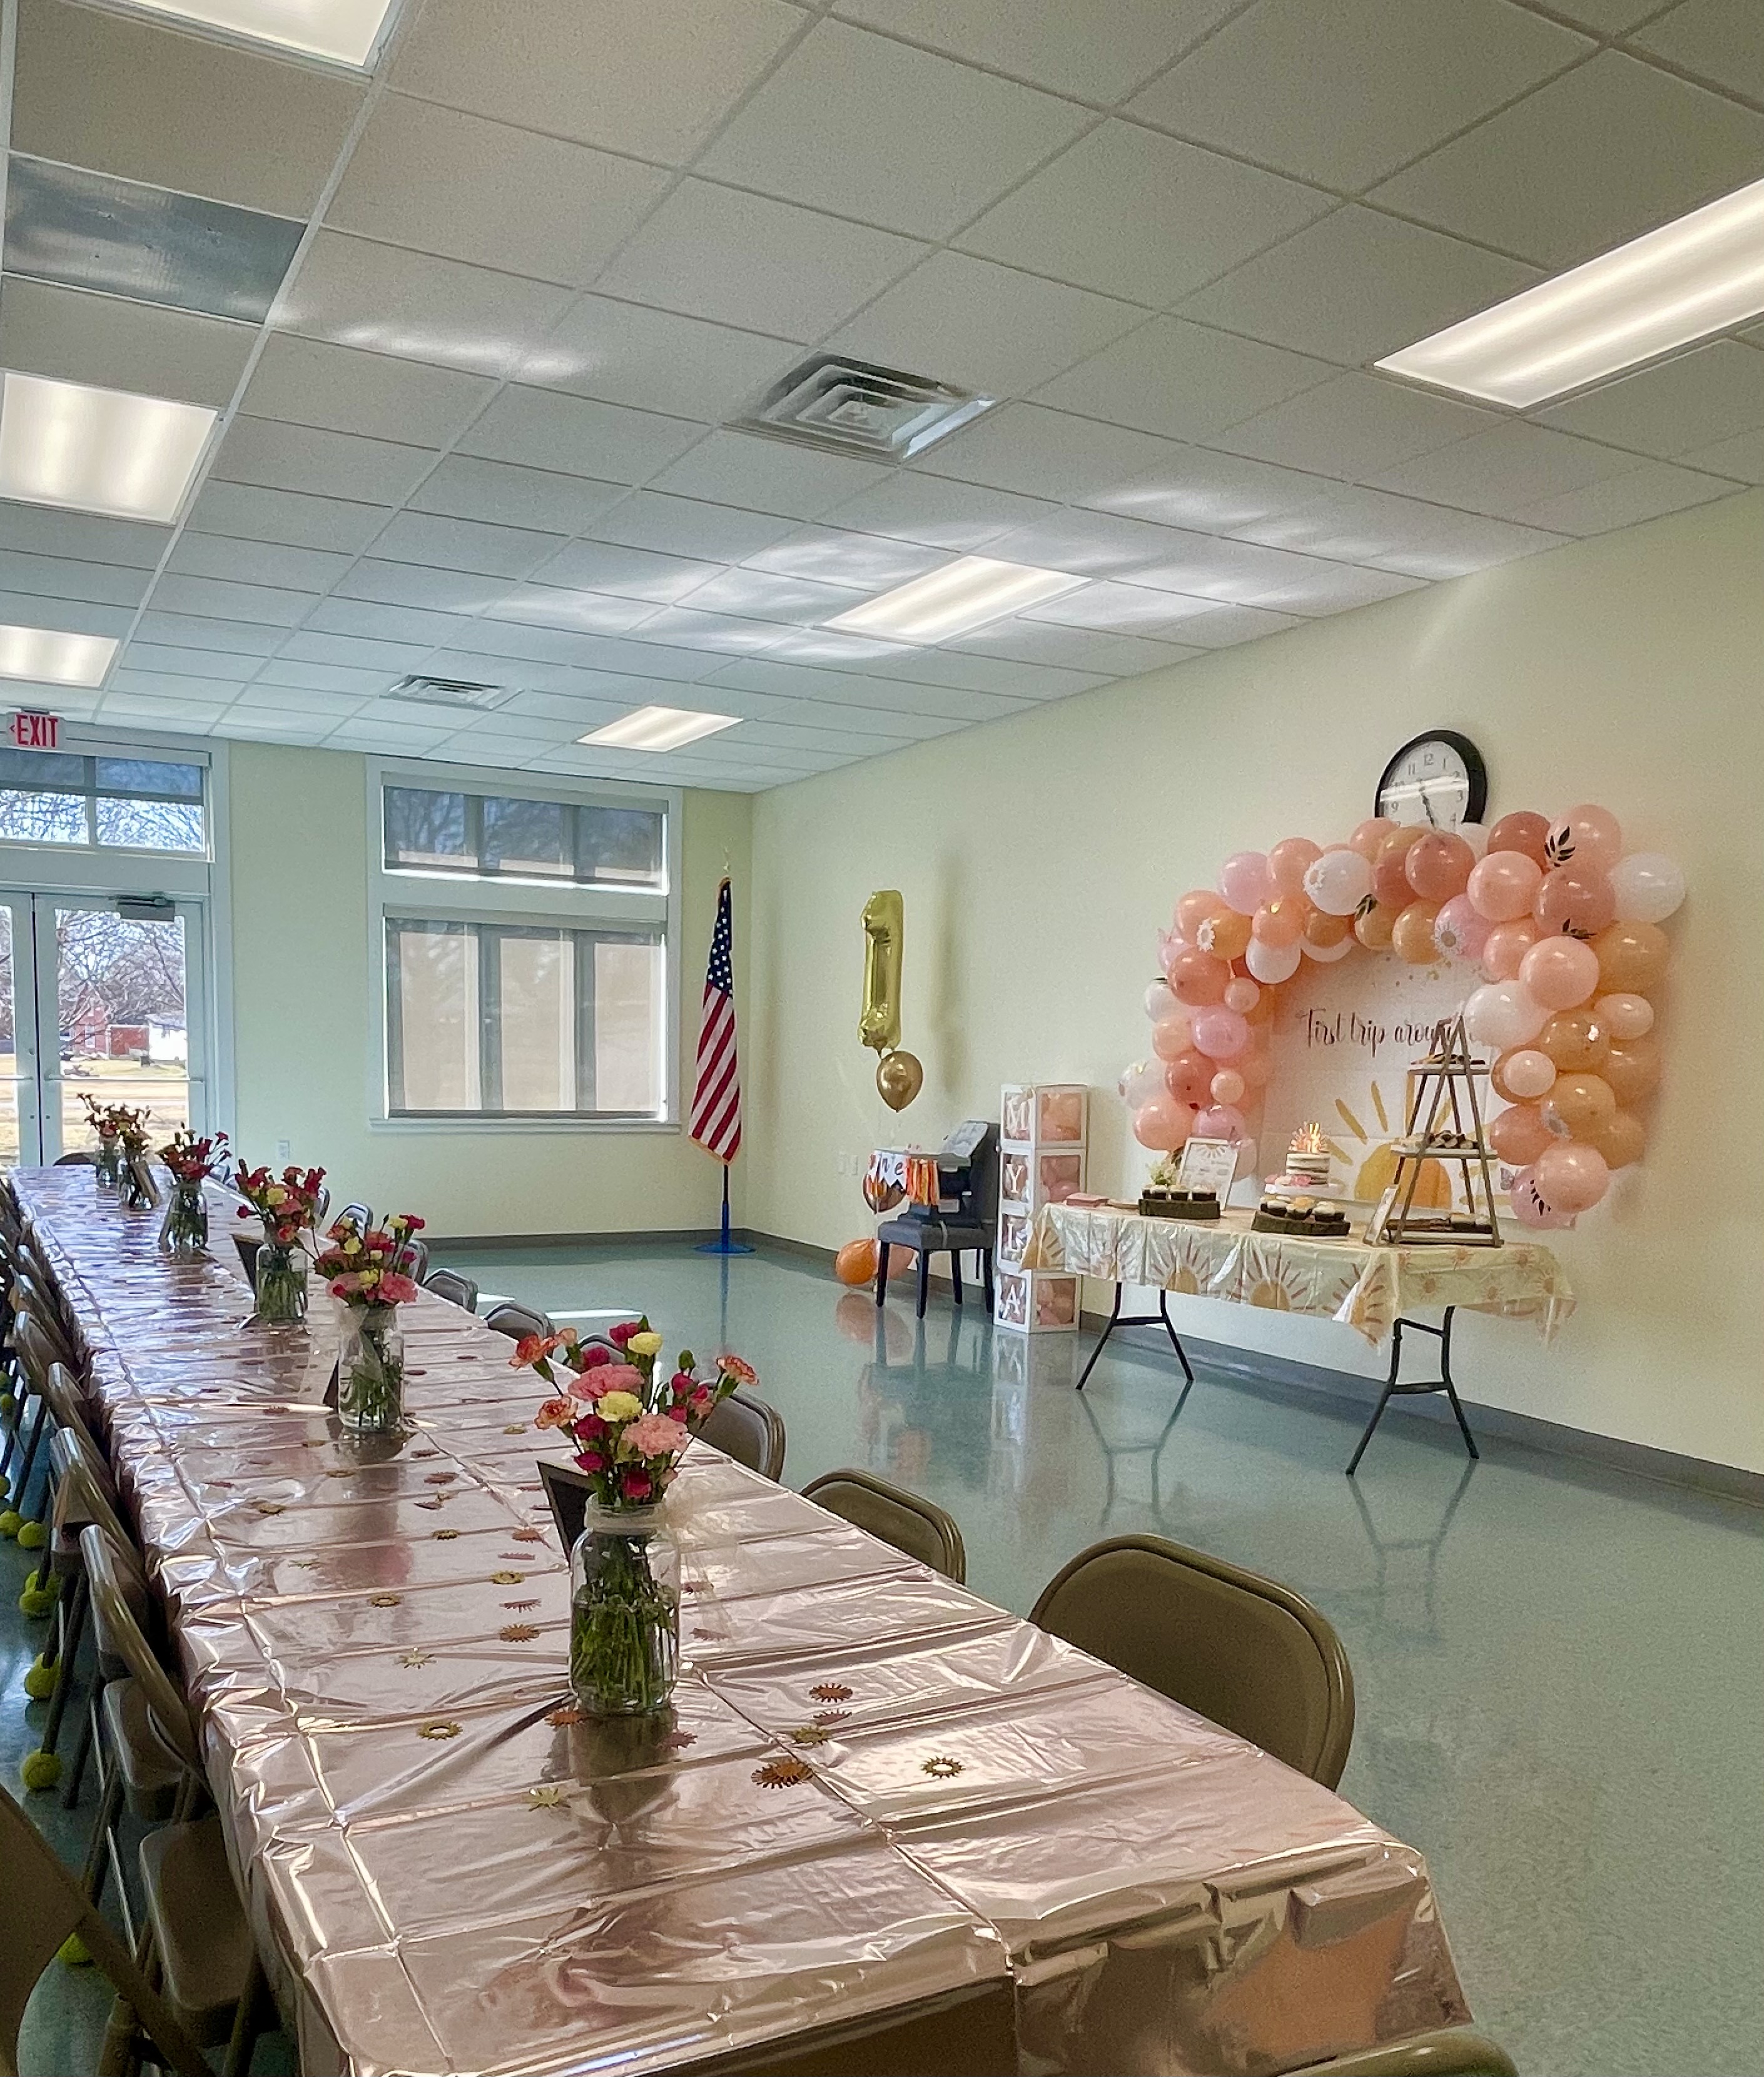 Meeting Room of the Community Center Decorated for Birthday Party